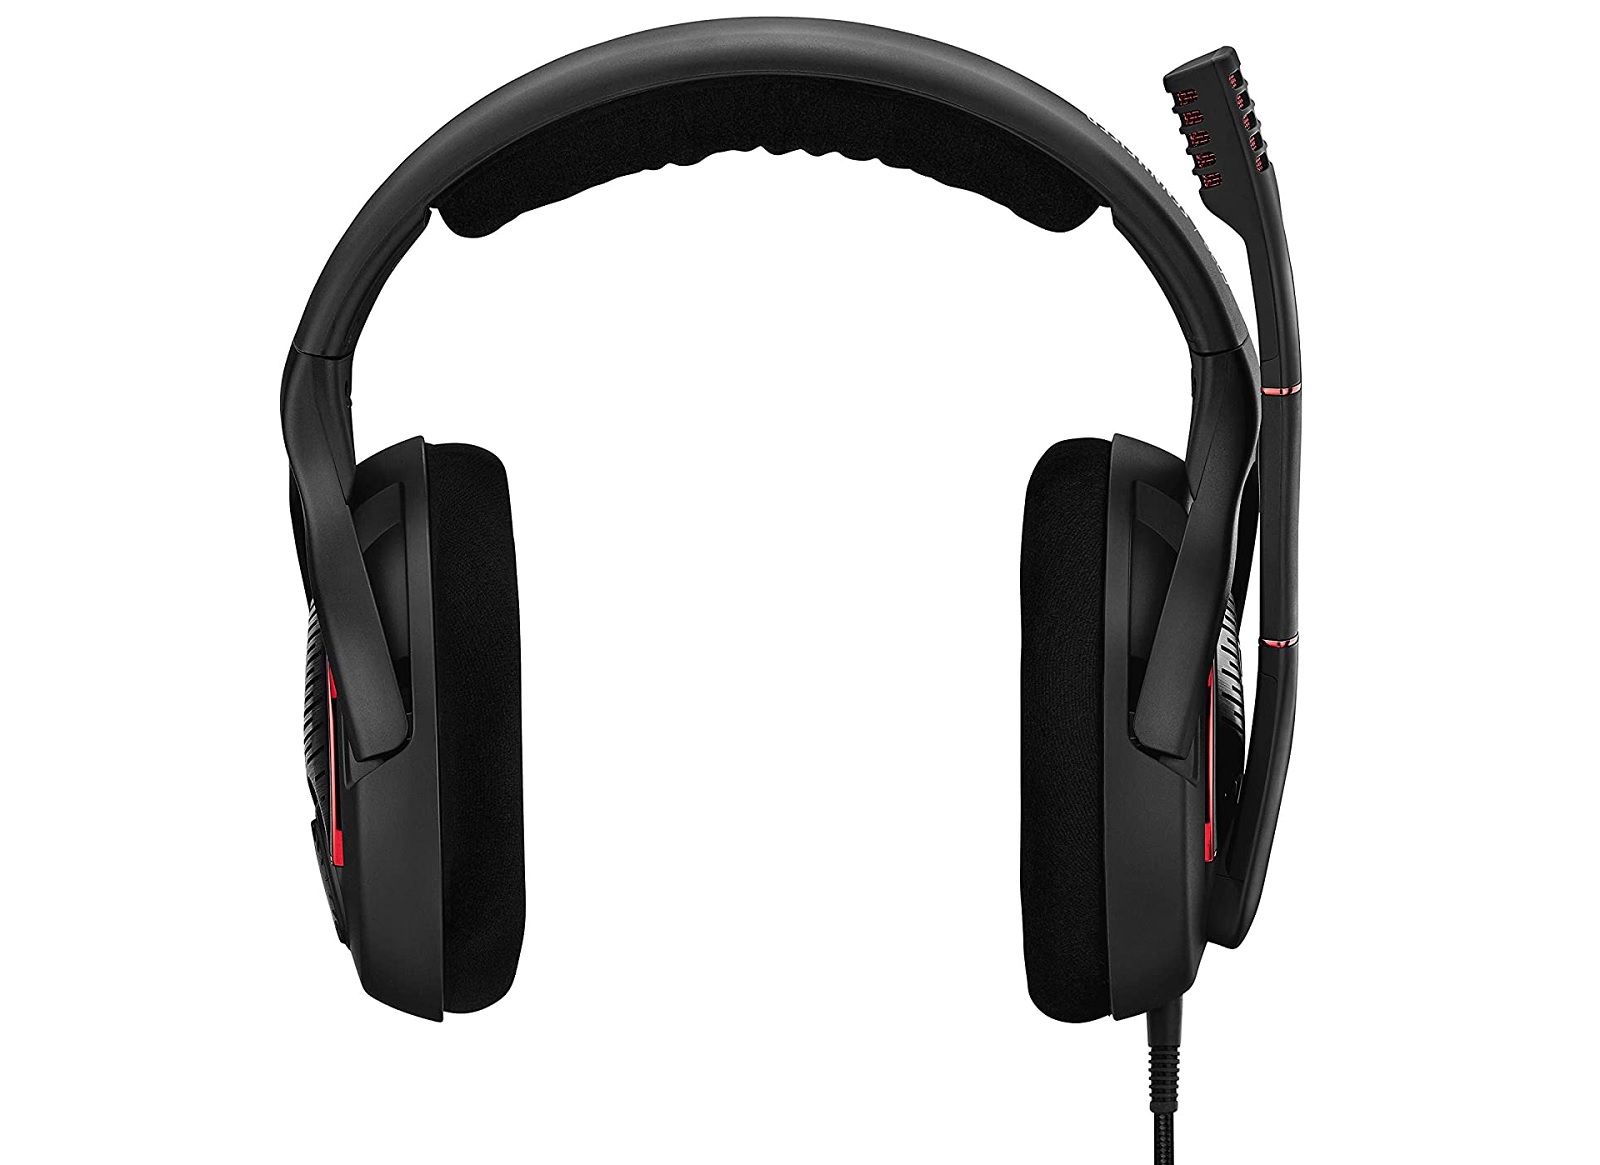 epis i sennheiser game one headset featuring a built-in volume button